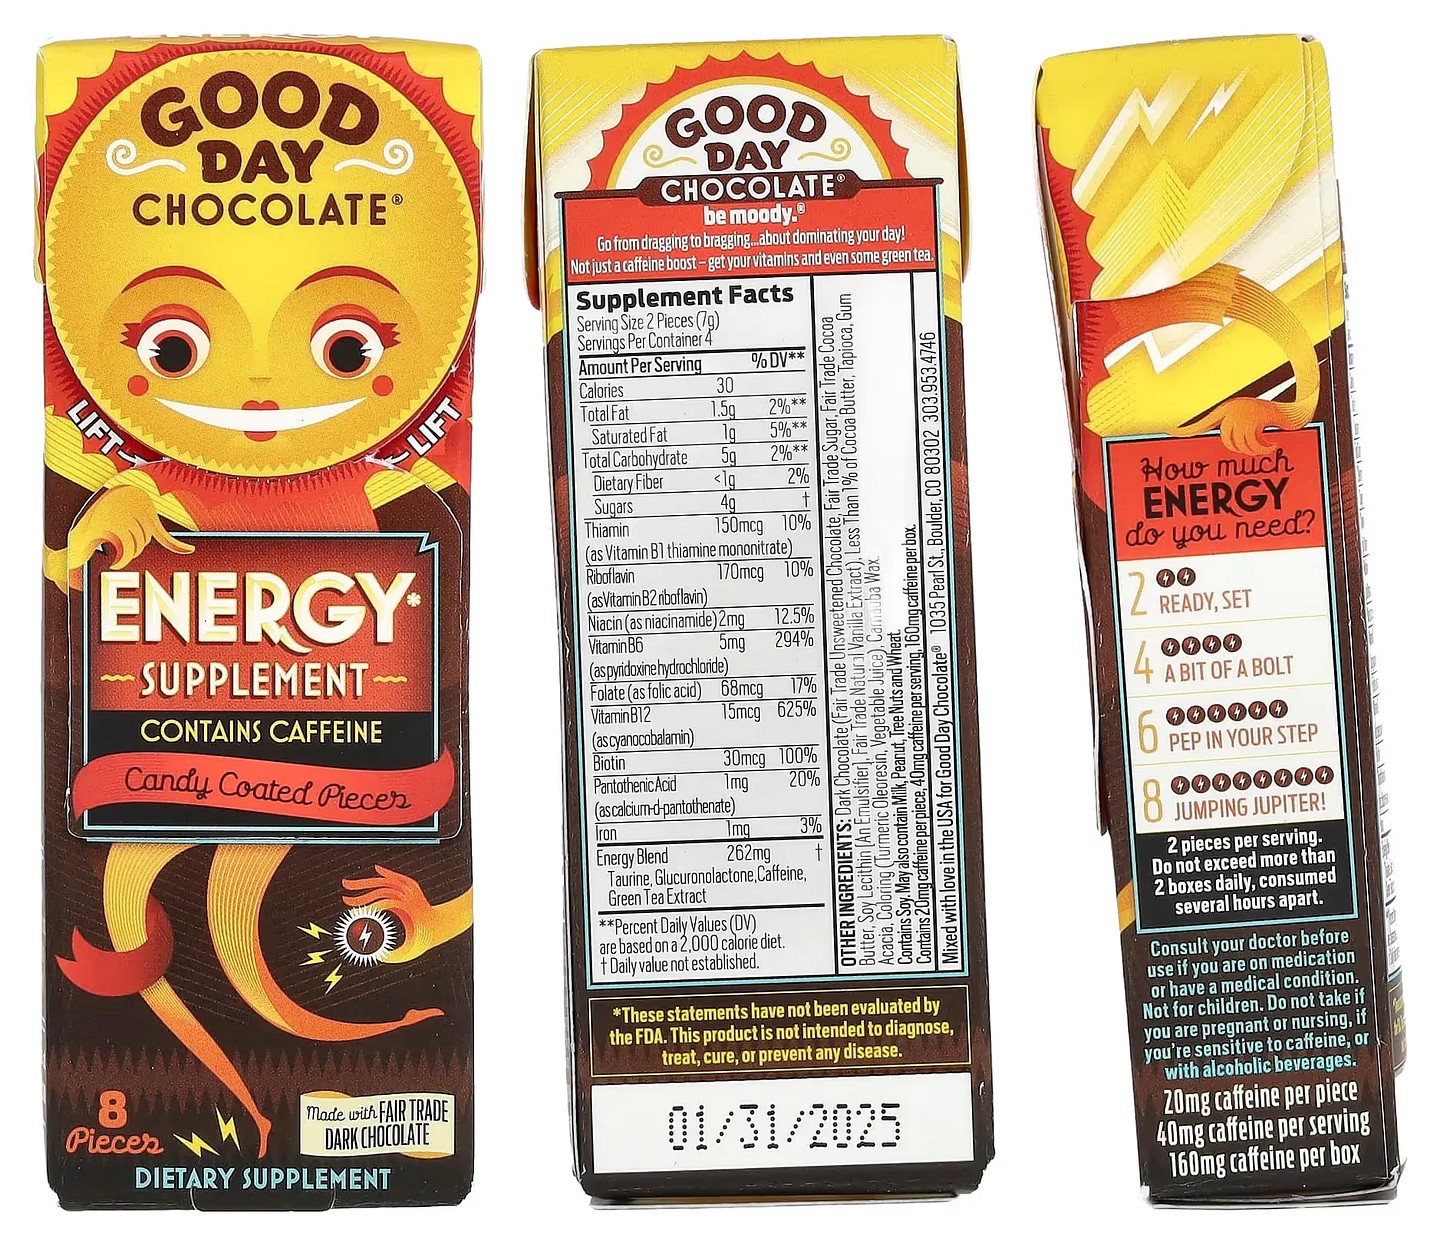 Good Day Chocolate, Energy Supplement packaging